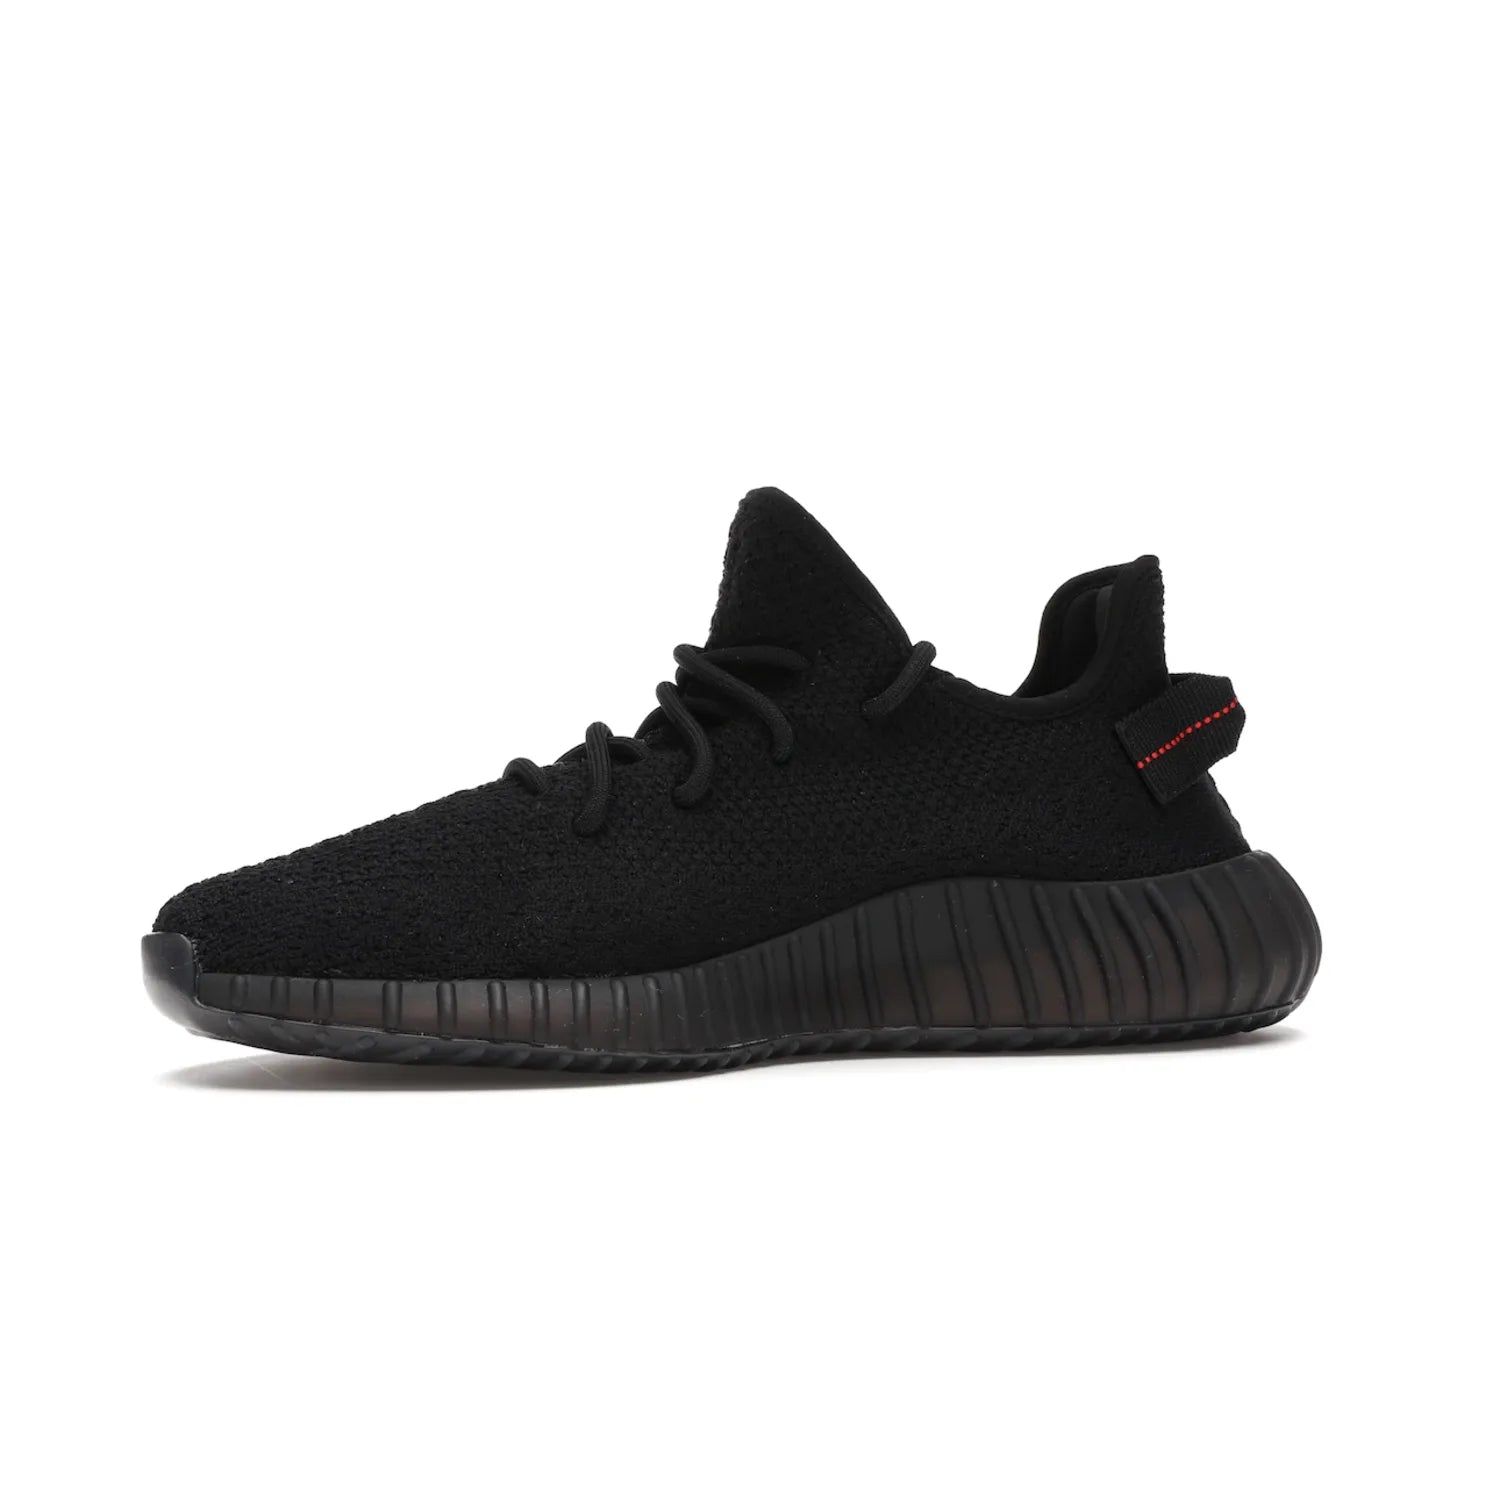 adidas Yeezy Boost 350 V2 Black Red (2017/2020) - Image 17 - Only at www.BallersClubKickz.com - Adidas Yeezy Boost 350 V2 Black Red: a classic colorway featuring black Primeknit upper, BOOST cushioning system, and iconic "SPLY-350" text. Released in 2017 for a retail price of $220.